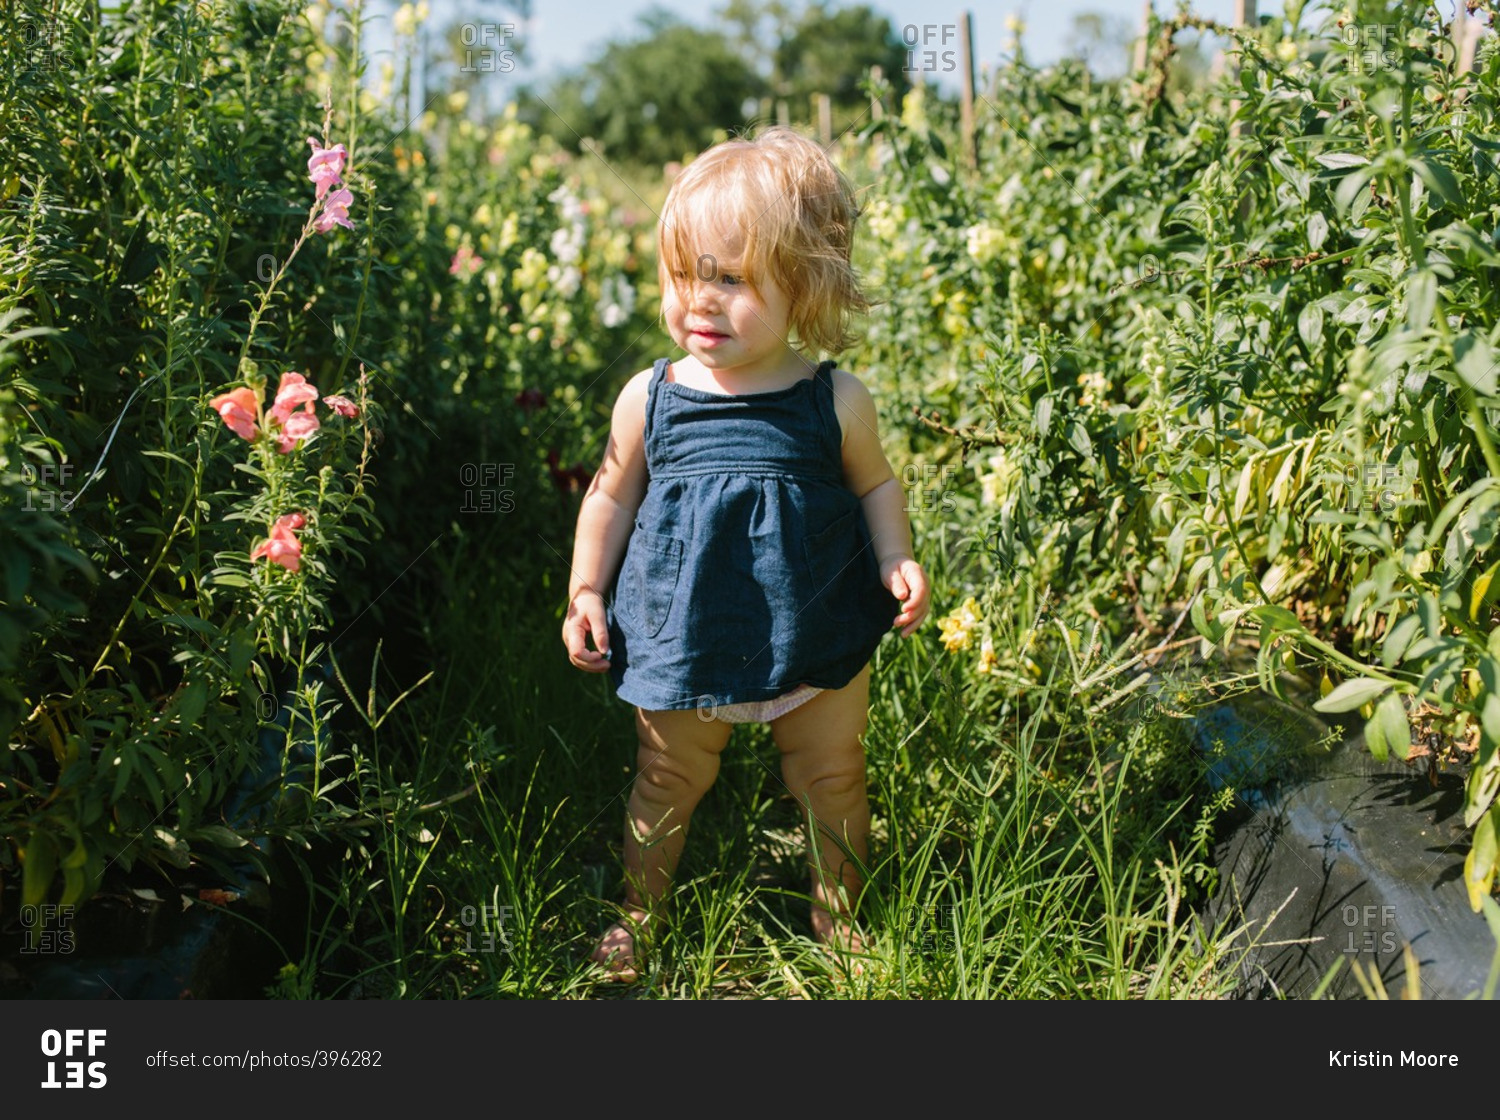 Cute toddler girl standing among flowers in field